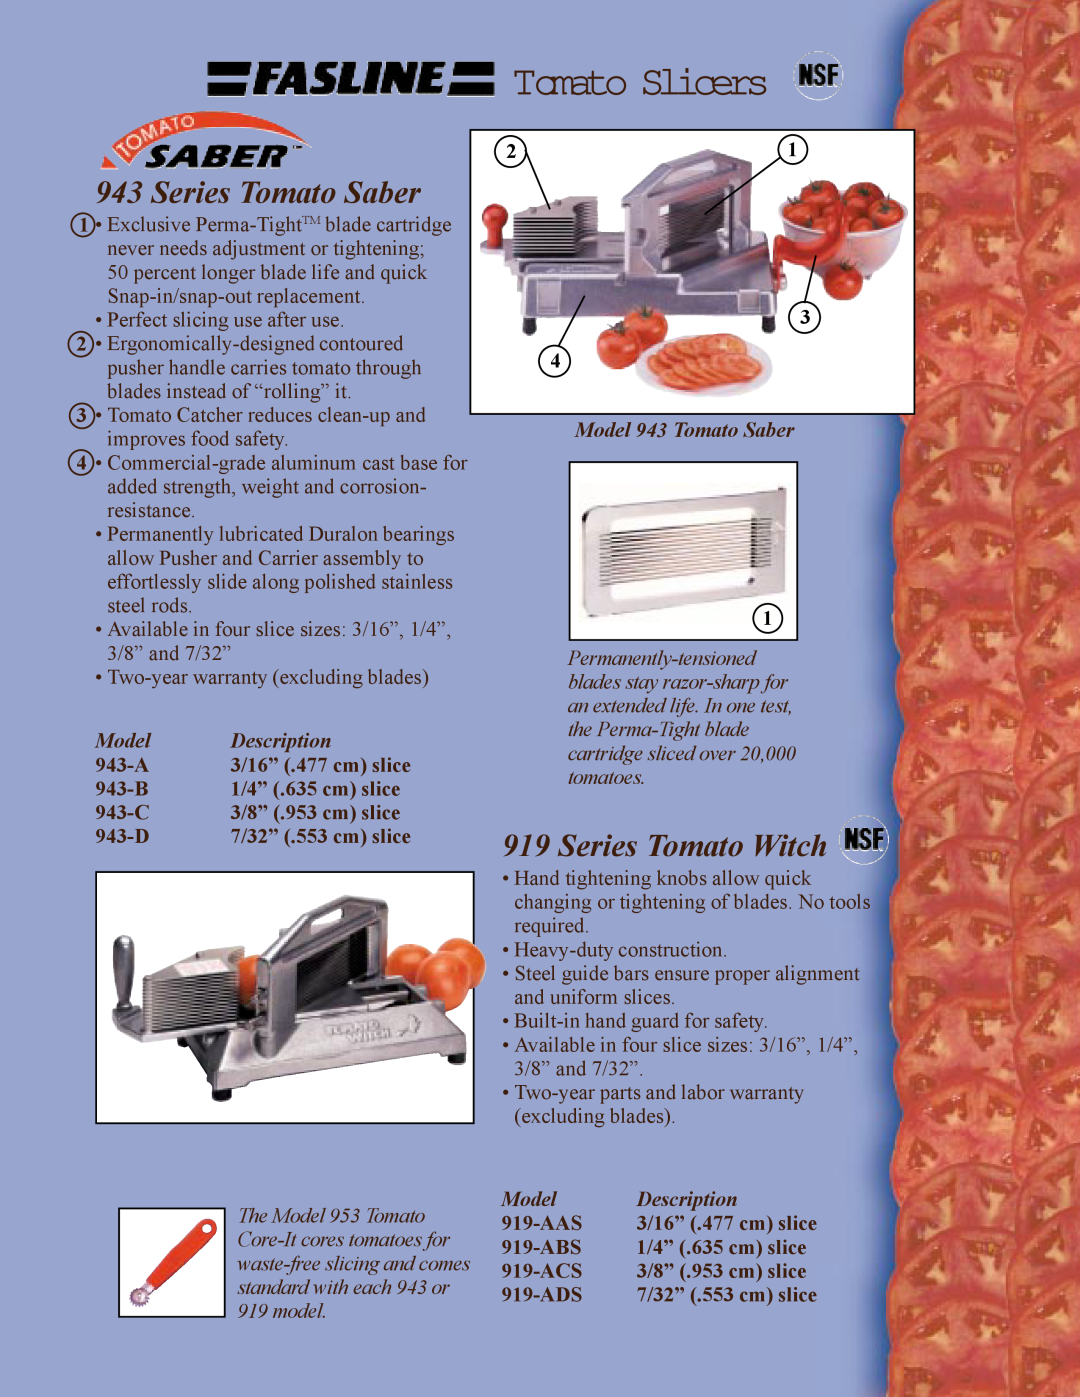 Prince Castle Cutters, Wedgers, Dicers manual Tomato Slicers, Series Tomato Saber, Series Tomato Witch 